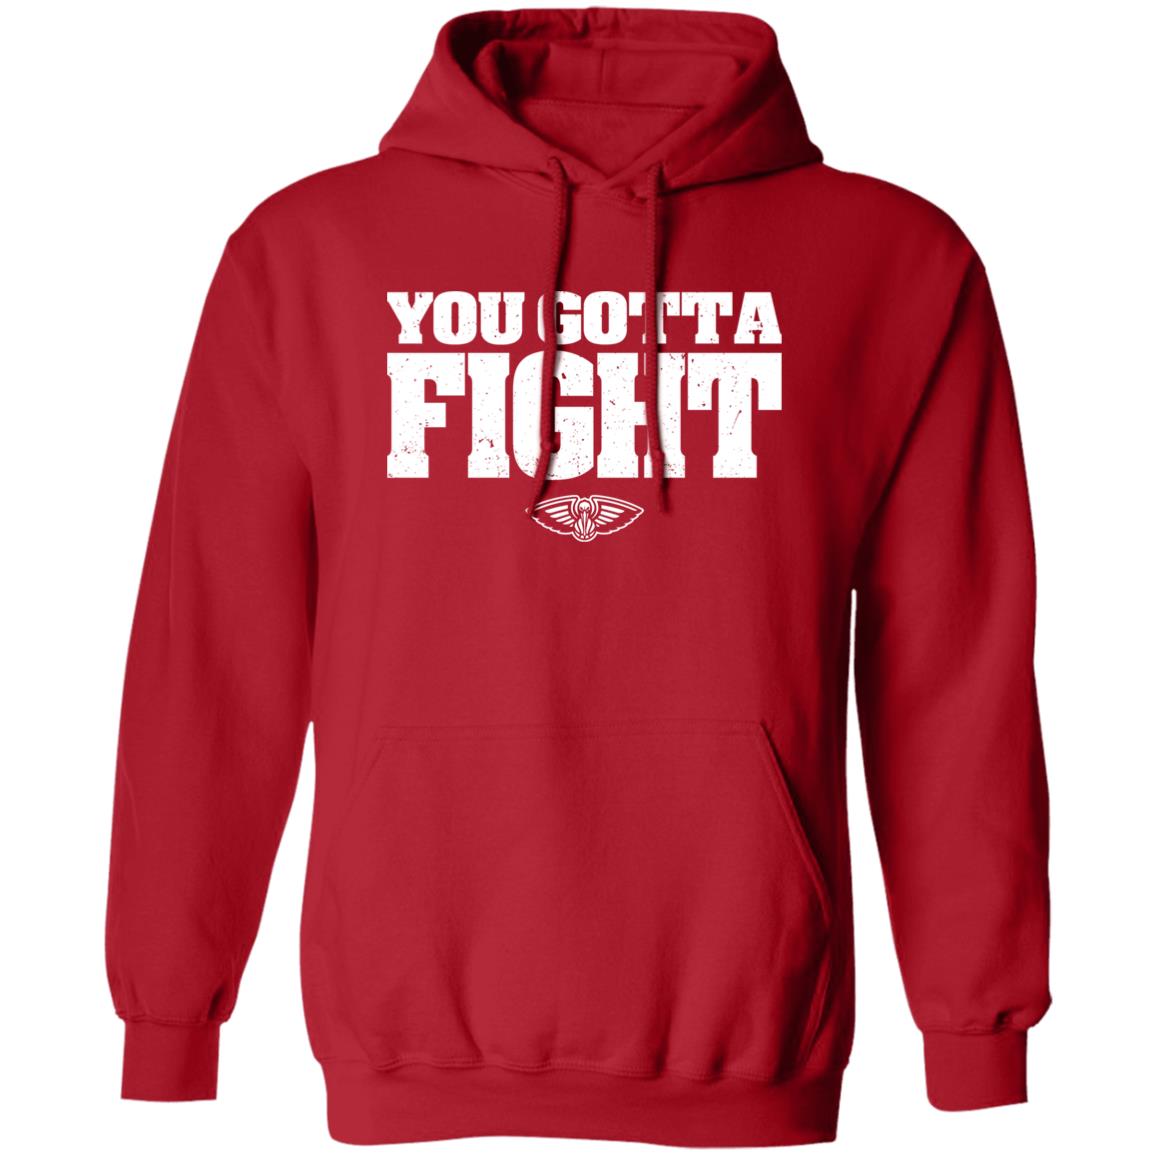 Pelicansnba You Gotta Fight New Orleans Pelicans Red Shirt 1